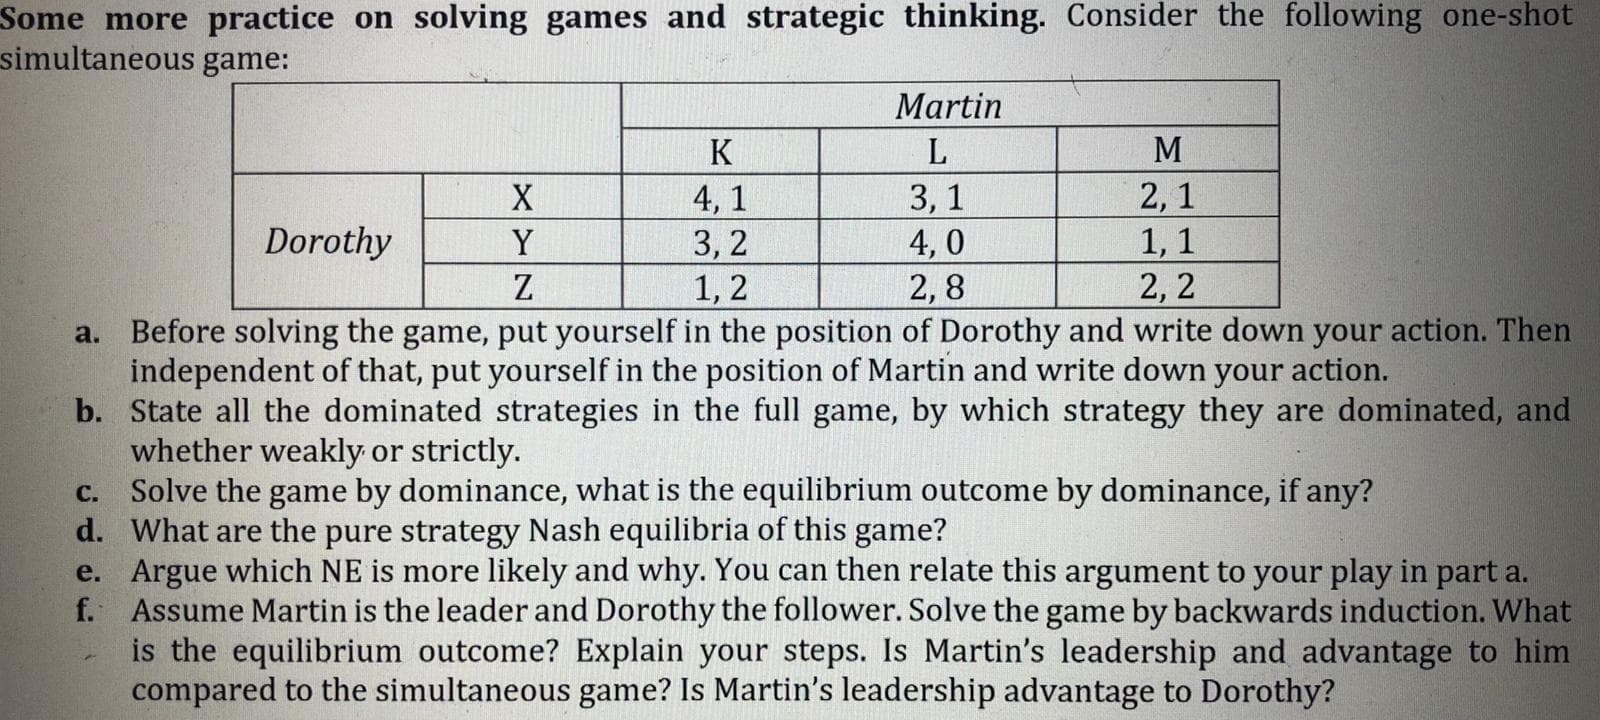 Some more practice on solving games and strategic thinking. Consider the following one-snot
simultaneous game:
Martin
K
M
3, 1
4, 0
2,8
2,1
1, 1
2, 2
X
4, 1
3, 2
Dorothy
Y
Z
1, 2
a. Before solving the game, put yourself in the position of Dorothy and write down your action. Then
independent of that, put yourself in the position of Martin and write down your action.
b. State all the dominated strategies in the full game, by which strategy they are dominated, and
whether weakly or strictly.
c. Solve the game by dominance, what is the equilibrium outcome by dominance, if any?
d. What are the pure strategy Nash equilibria of this game?
e. Argue which NE is more likely and why. You can then relate this argument to your play in part a.
f. Assume Martin is the leader and Dorothy the follower. Solve the game by backwards induction. What
is the equilibrium outcome? Explain your steps. Is Martin's leadership and advantage to him
compared to the simultaneous game? Is Martin's leadership advantage to Dorothy?
